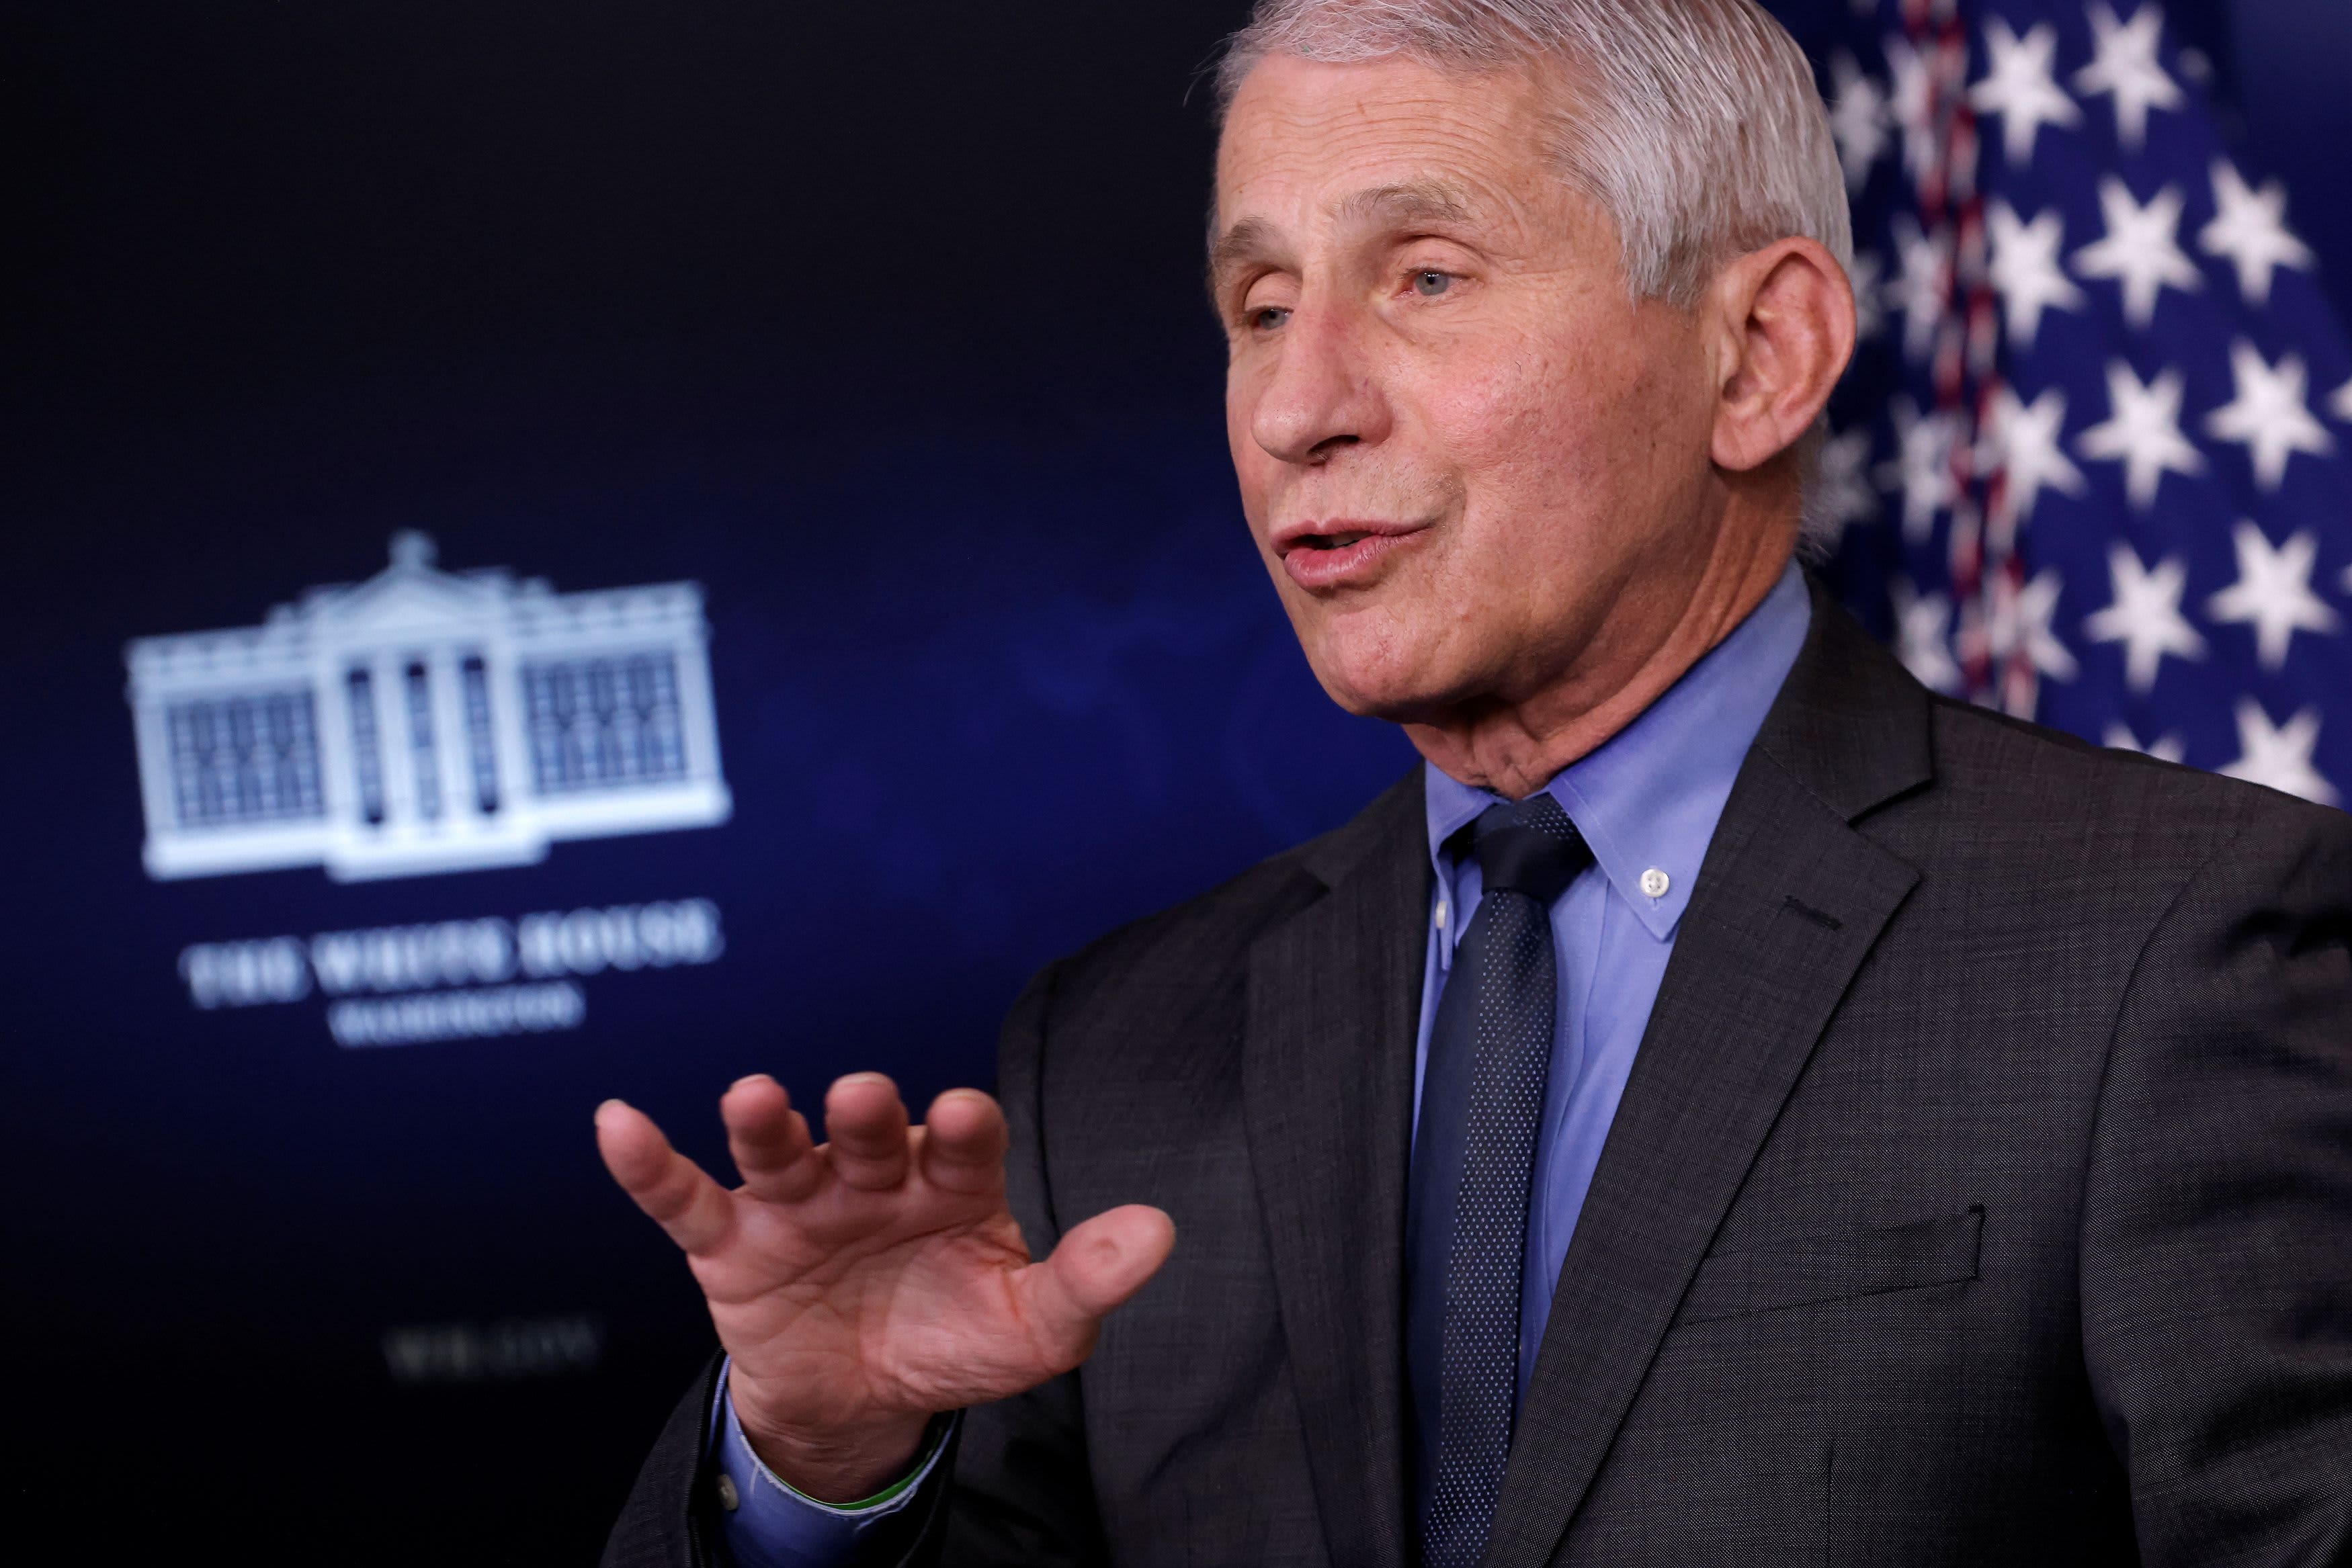 Dr. Anthony Fauci explains what the US “break” means for J & J’s Covid vaccine